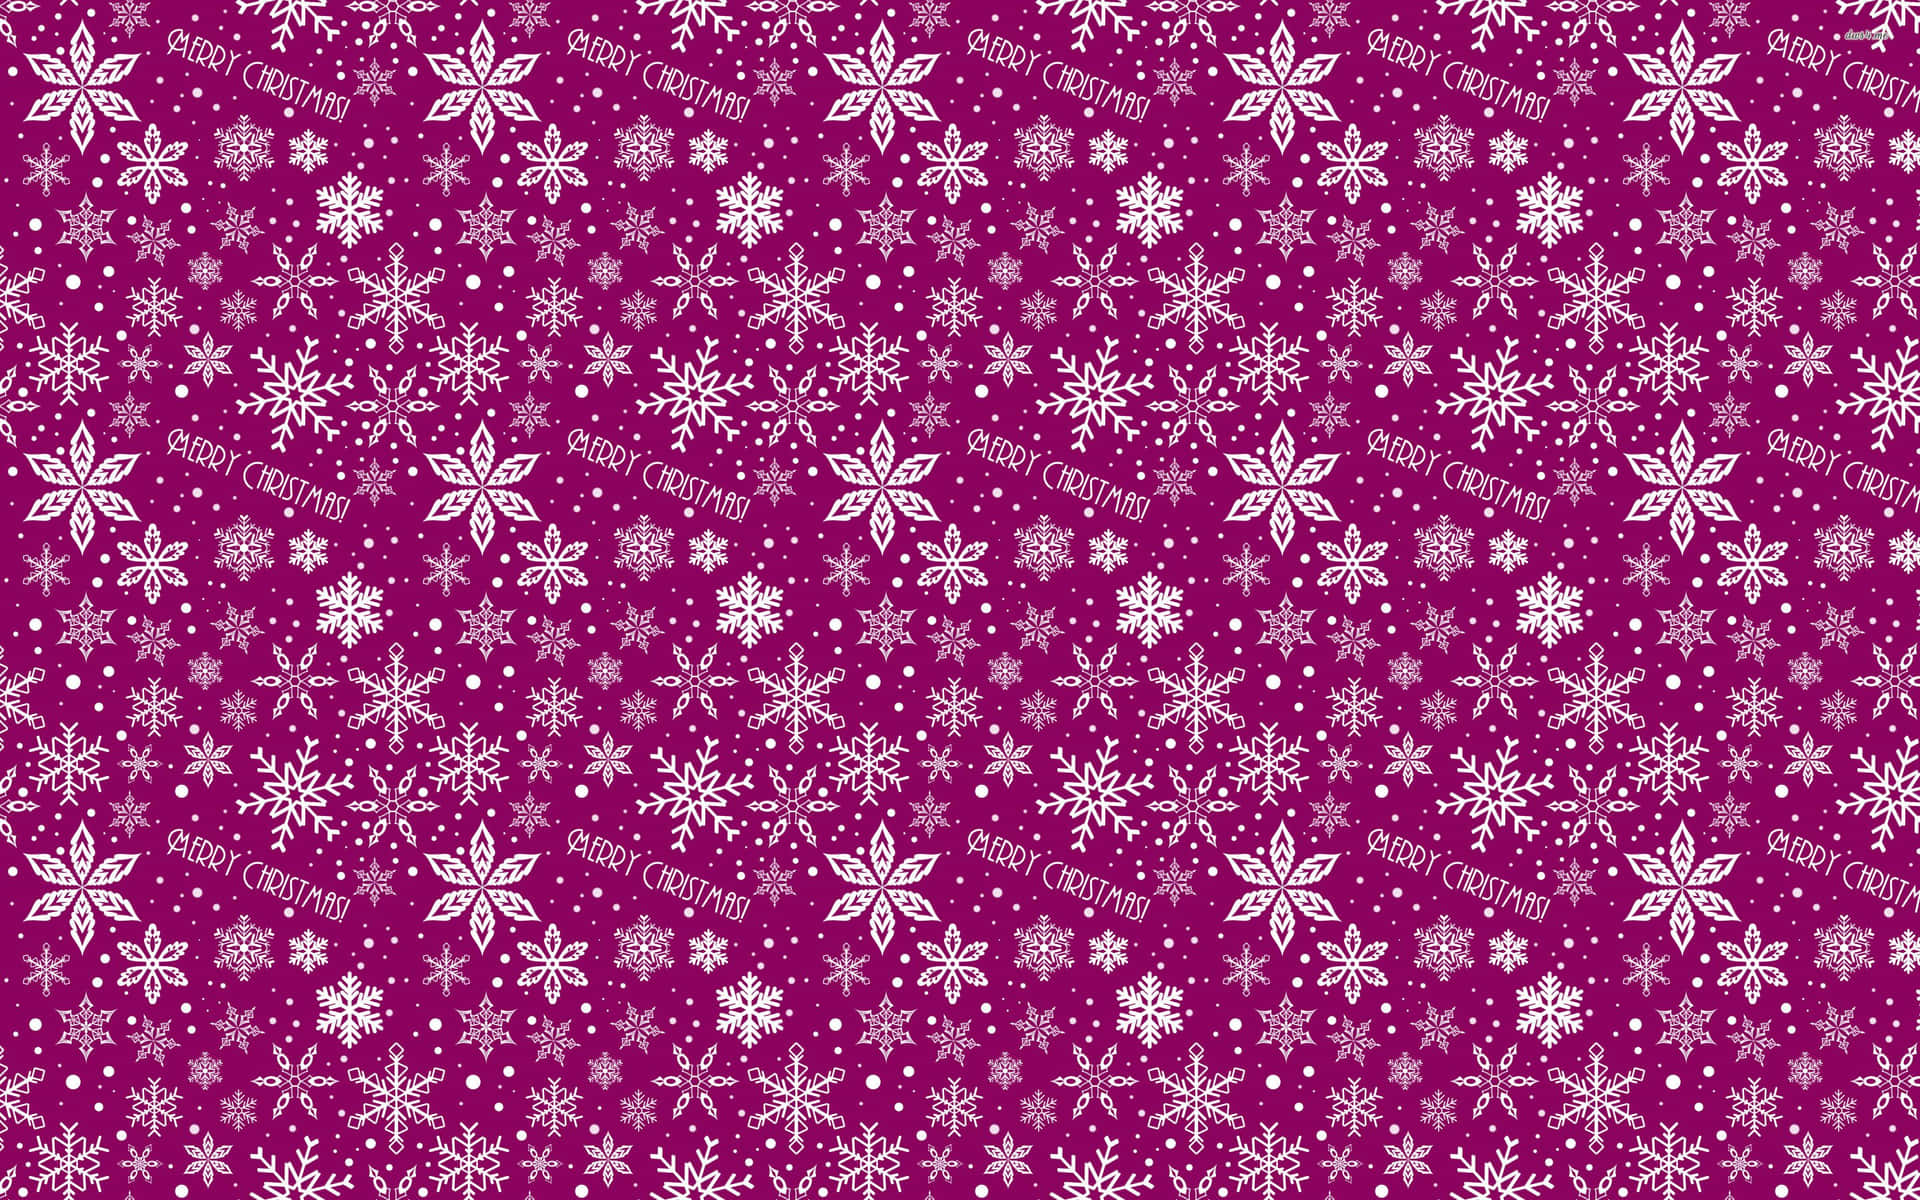 Get into the spirit of Christmas with this pattern of red and green ornaments and snowflakes! Wallpaper